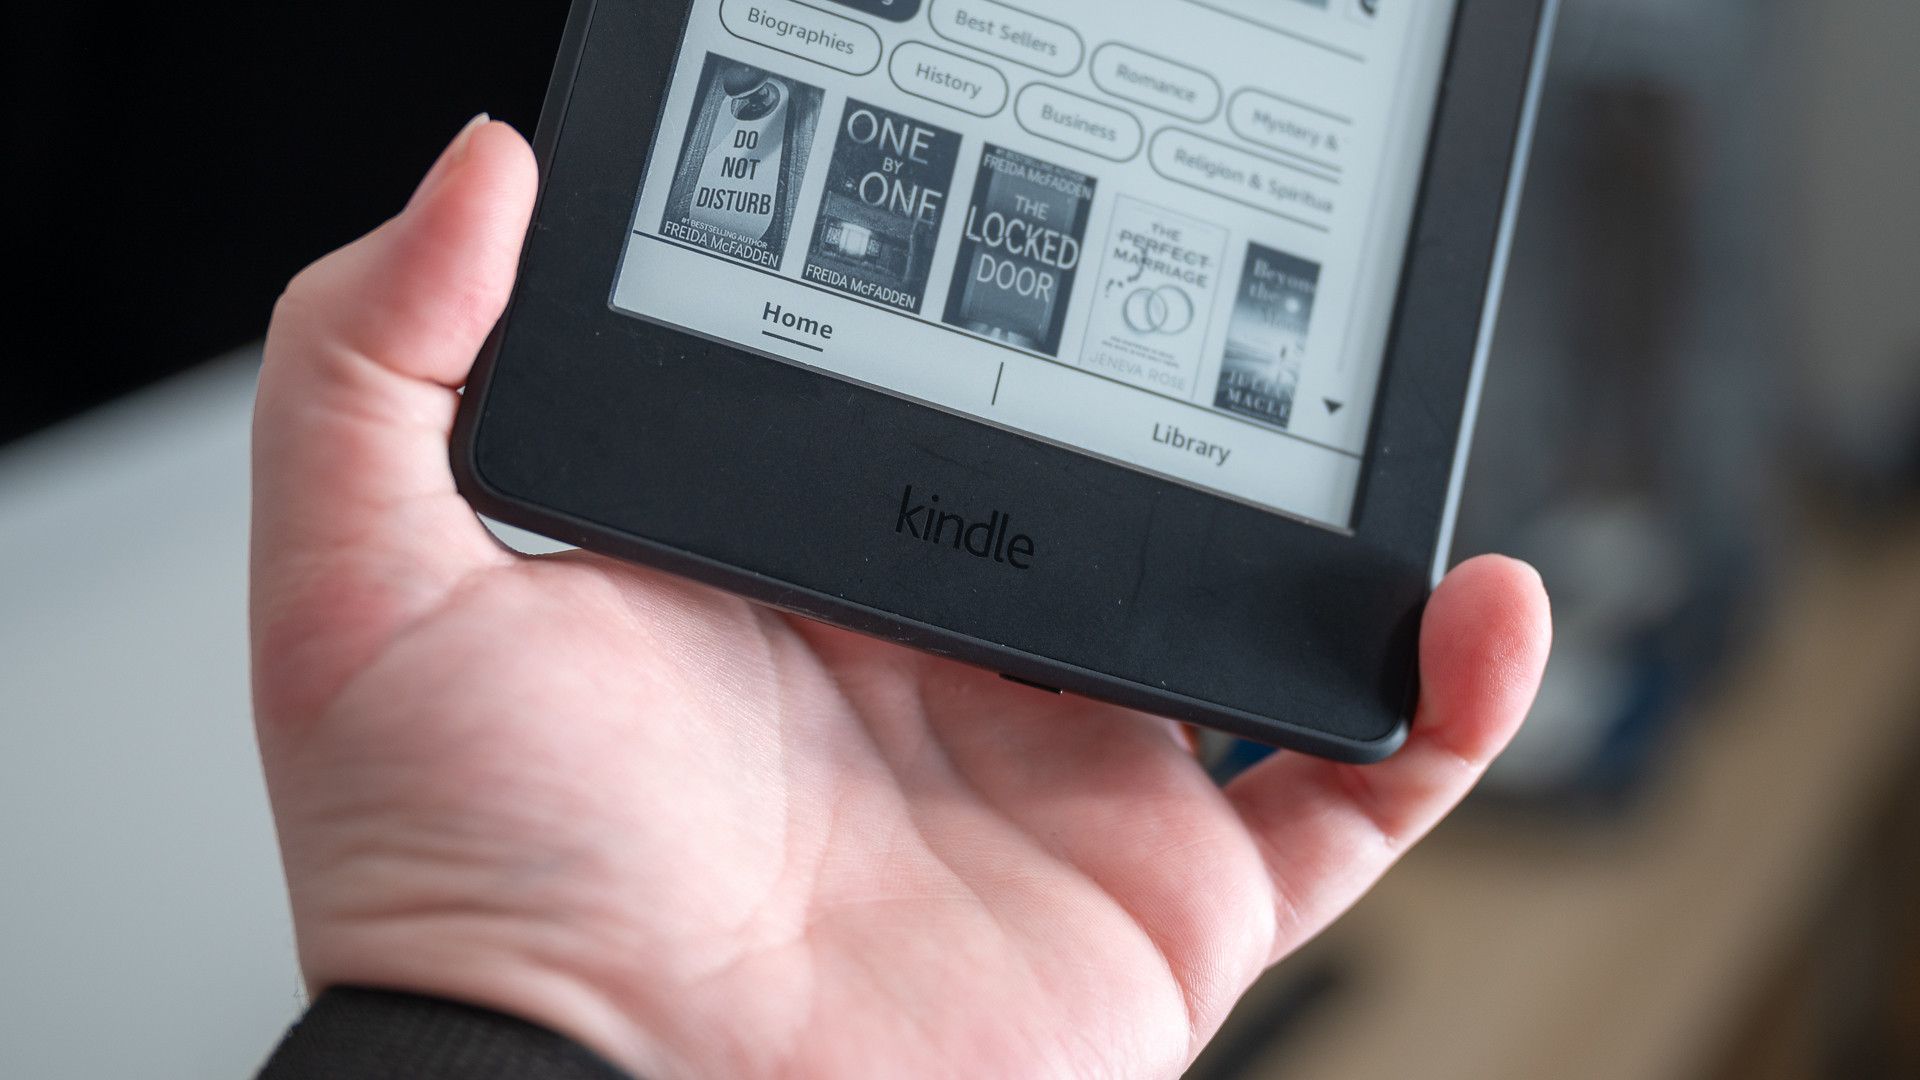 Kindle logo on the front of the 2015 Amazon Kindle Paperwhite eReader